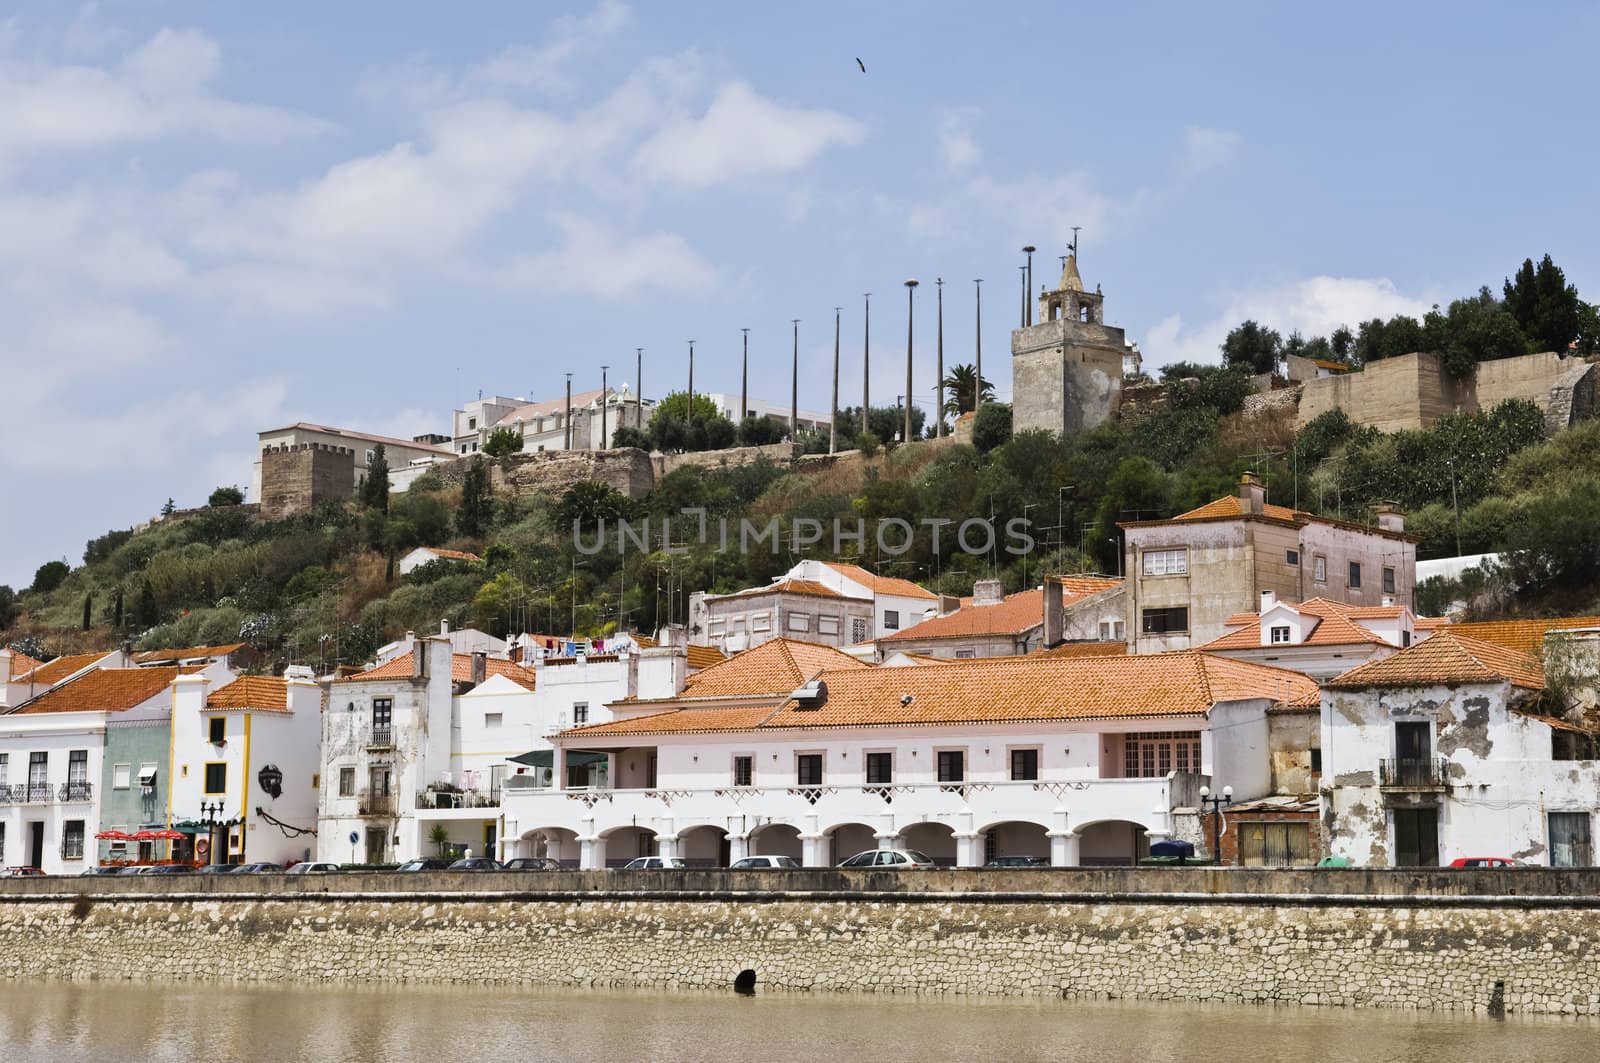 View of the historic town of Alcacer do Sal, Alentejo, Portugal
